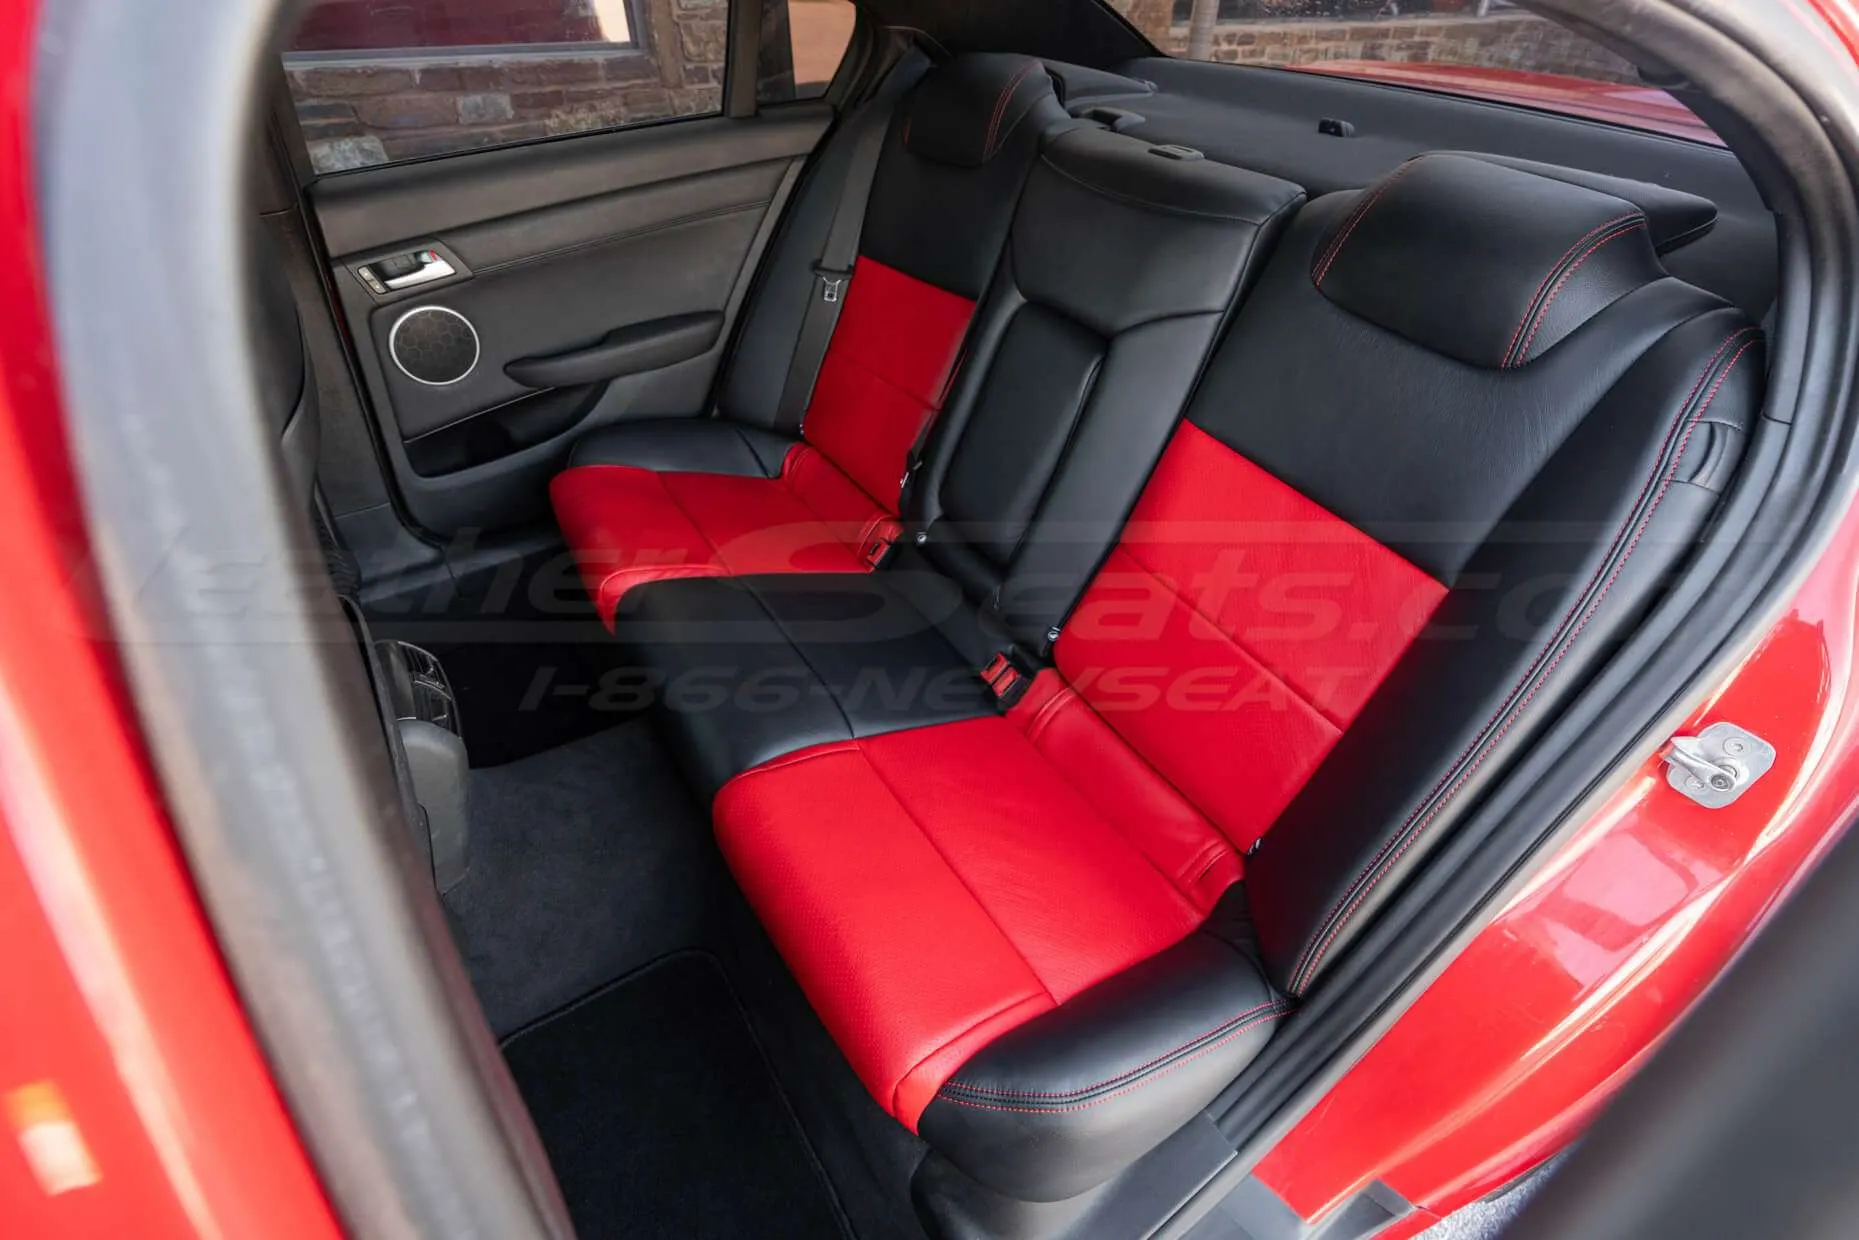 2008-2009 Pontiac G8 with installed rear leather seats in Black and Bright Red